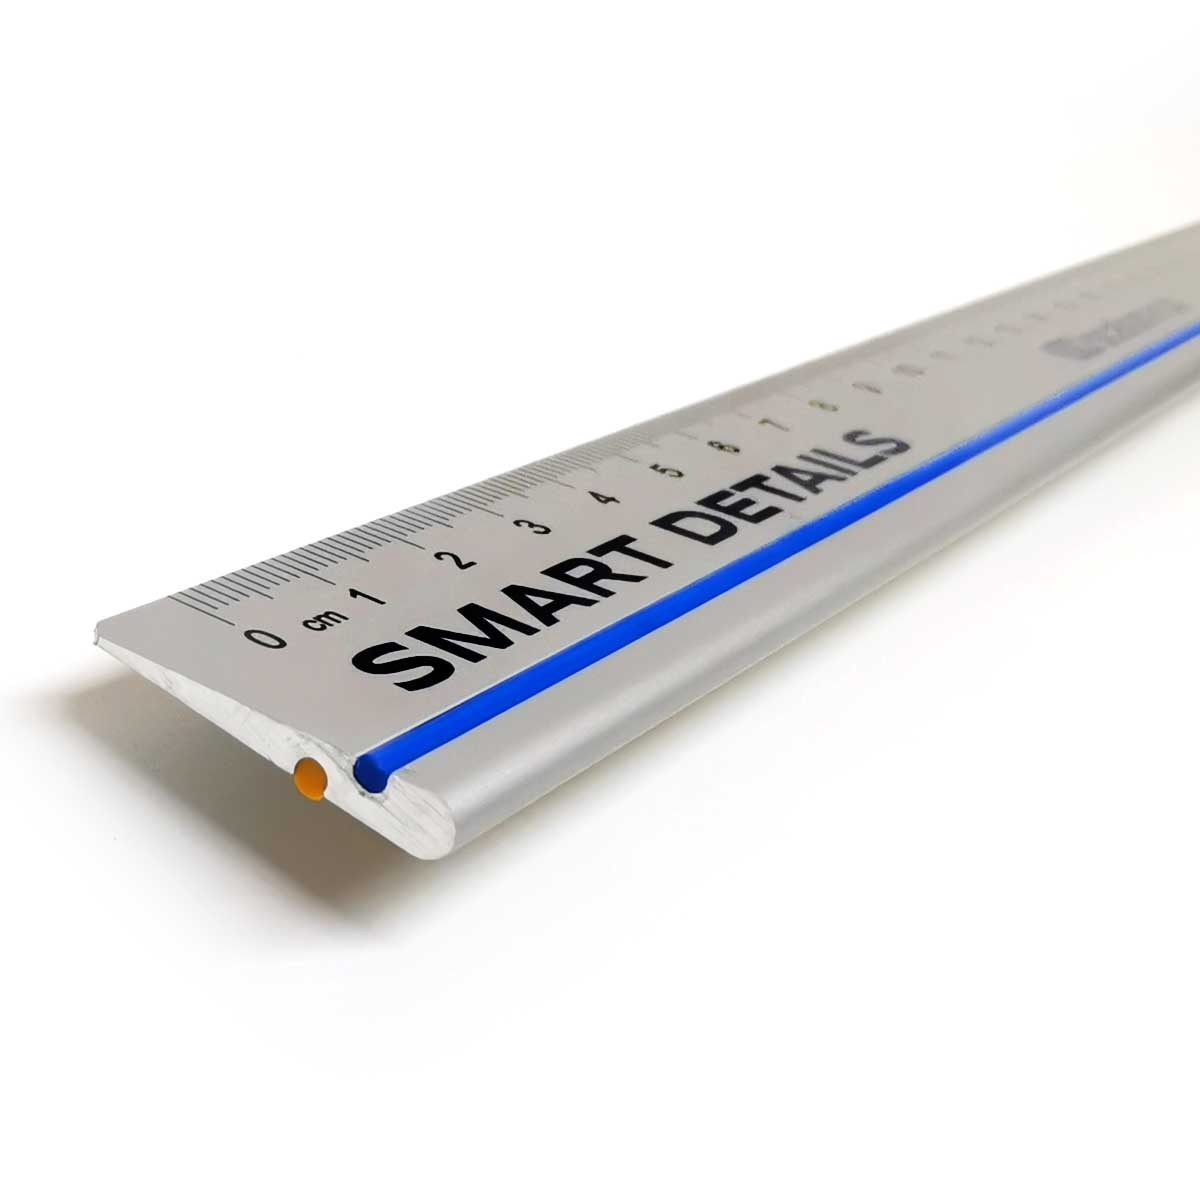 Detail view oval ruler with advertising